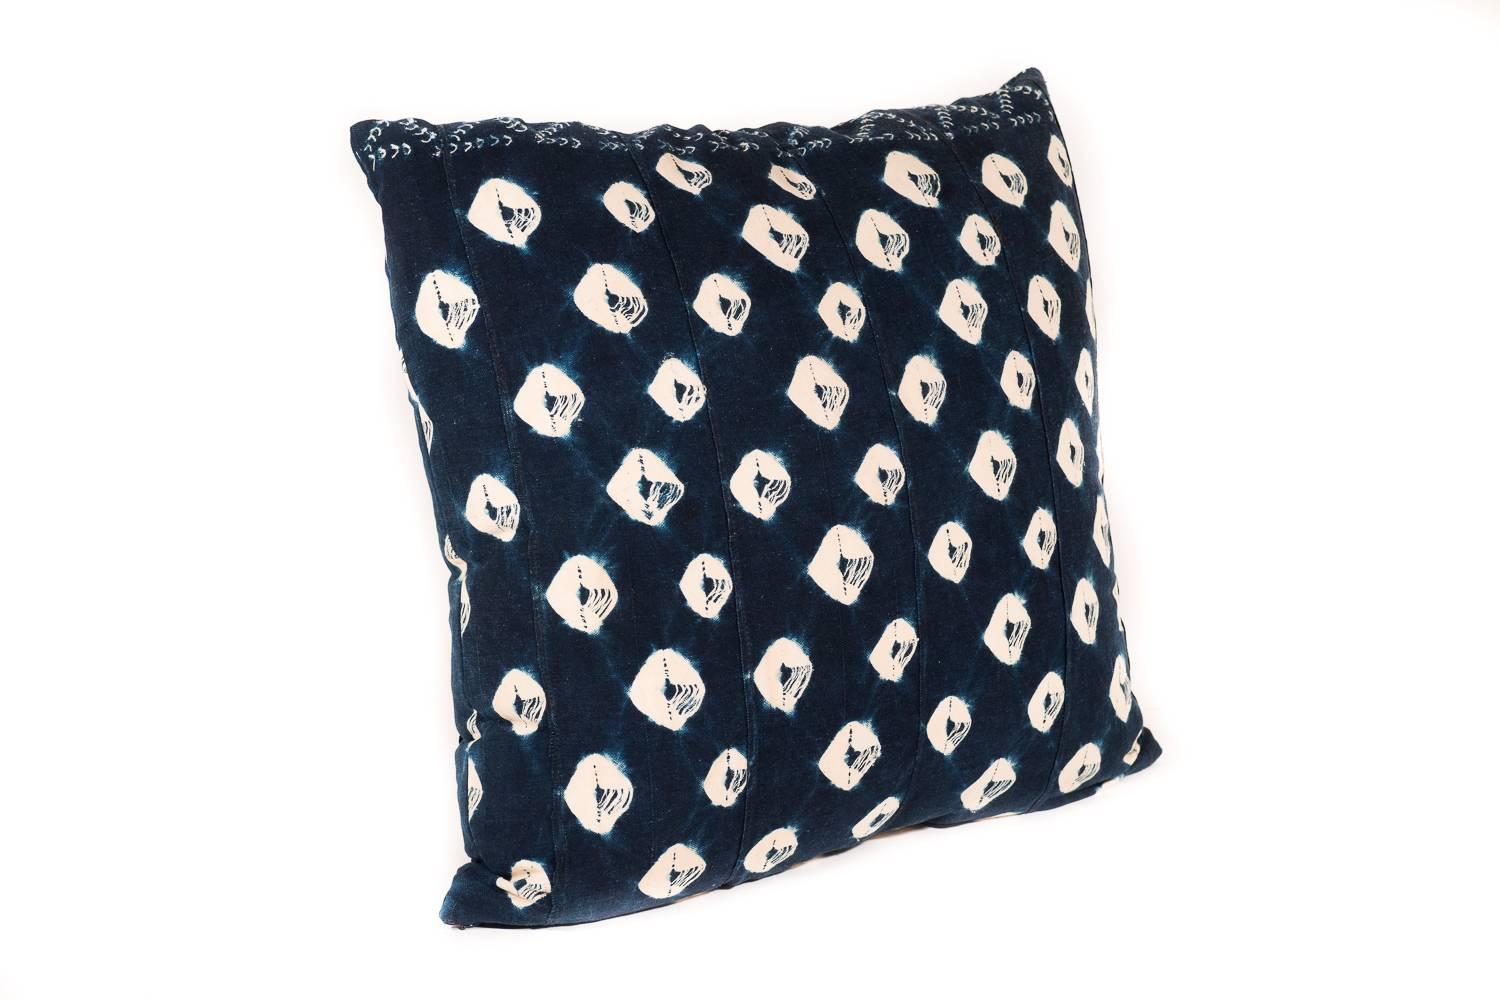 This large pillow is made from a vintage African textile. The polka-dot pattern is formed using complex tie-dye techniques with natural indigo. The best part is the soft and raw organic cotton which has backed for durability. The cushion content is